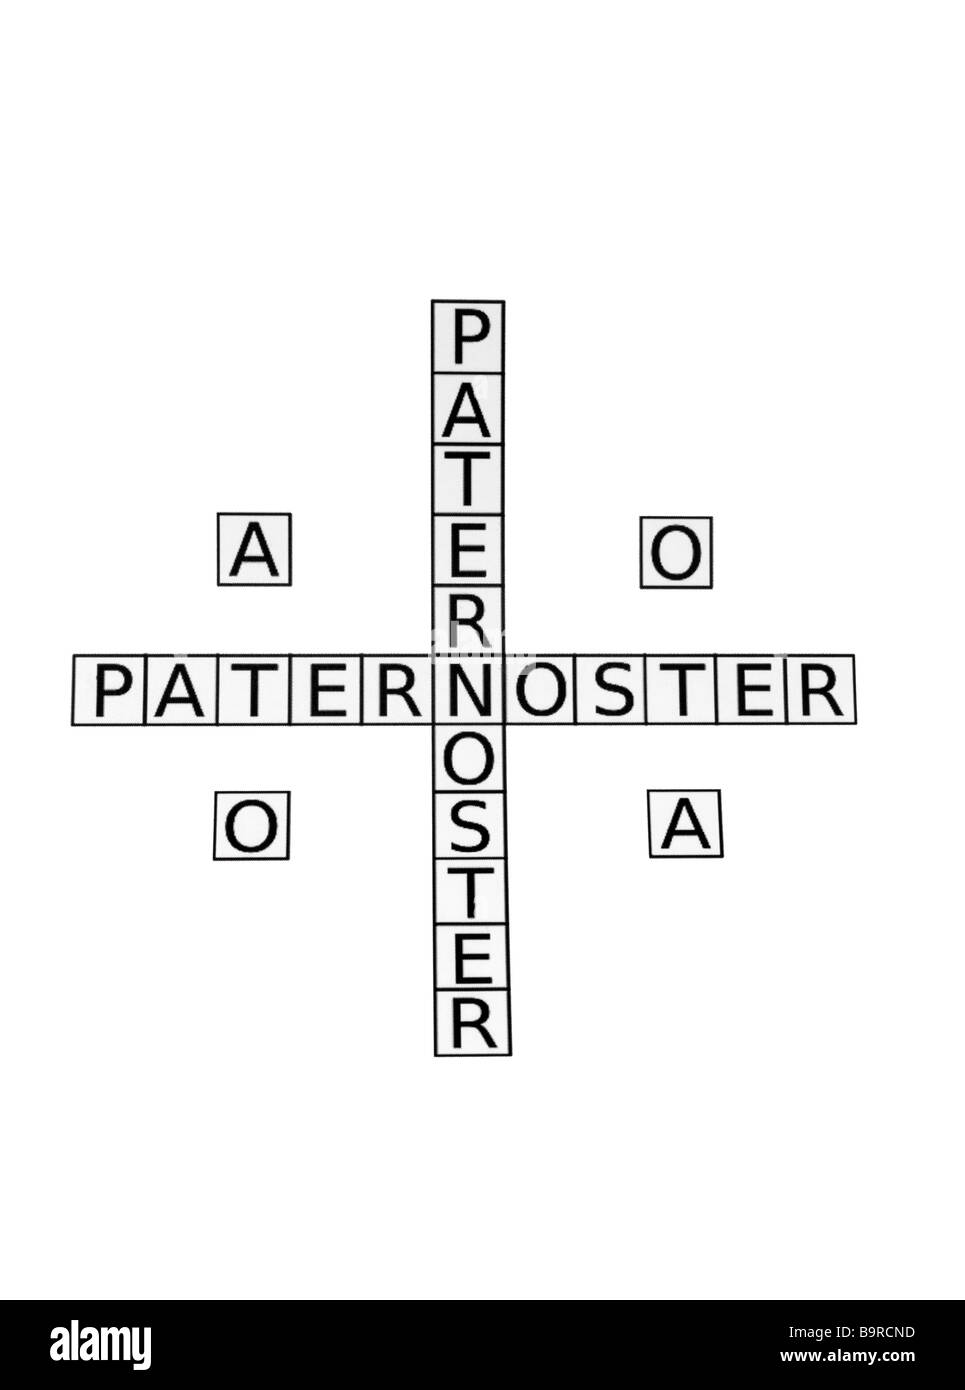 Paternoster with Alpha and Omega in the Shape of a Cross Stock Photo